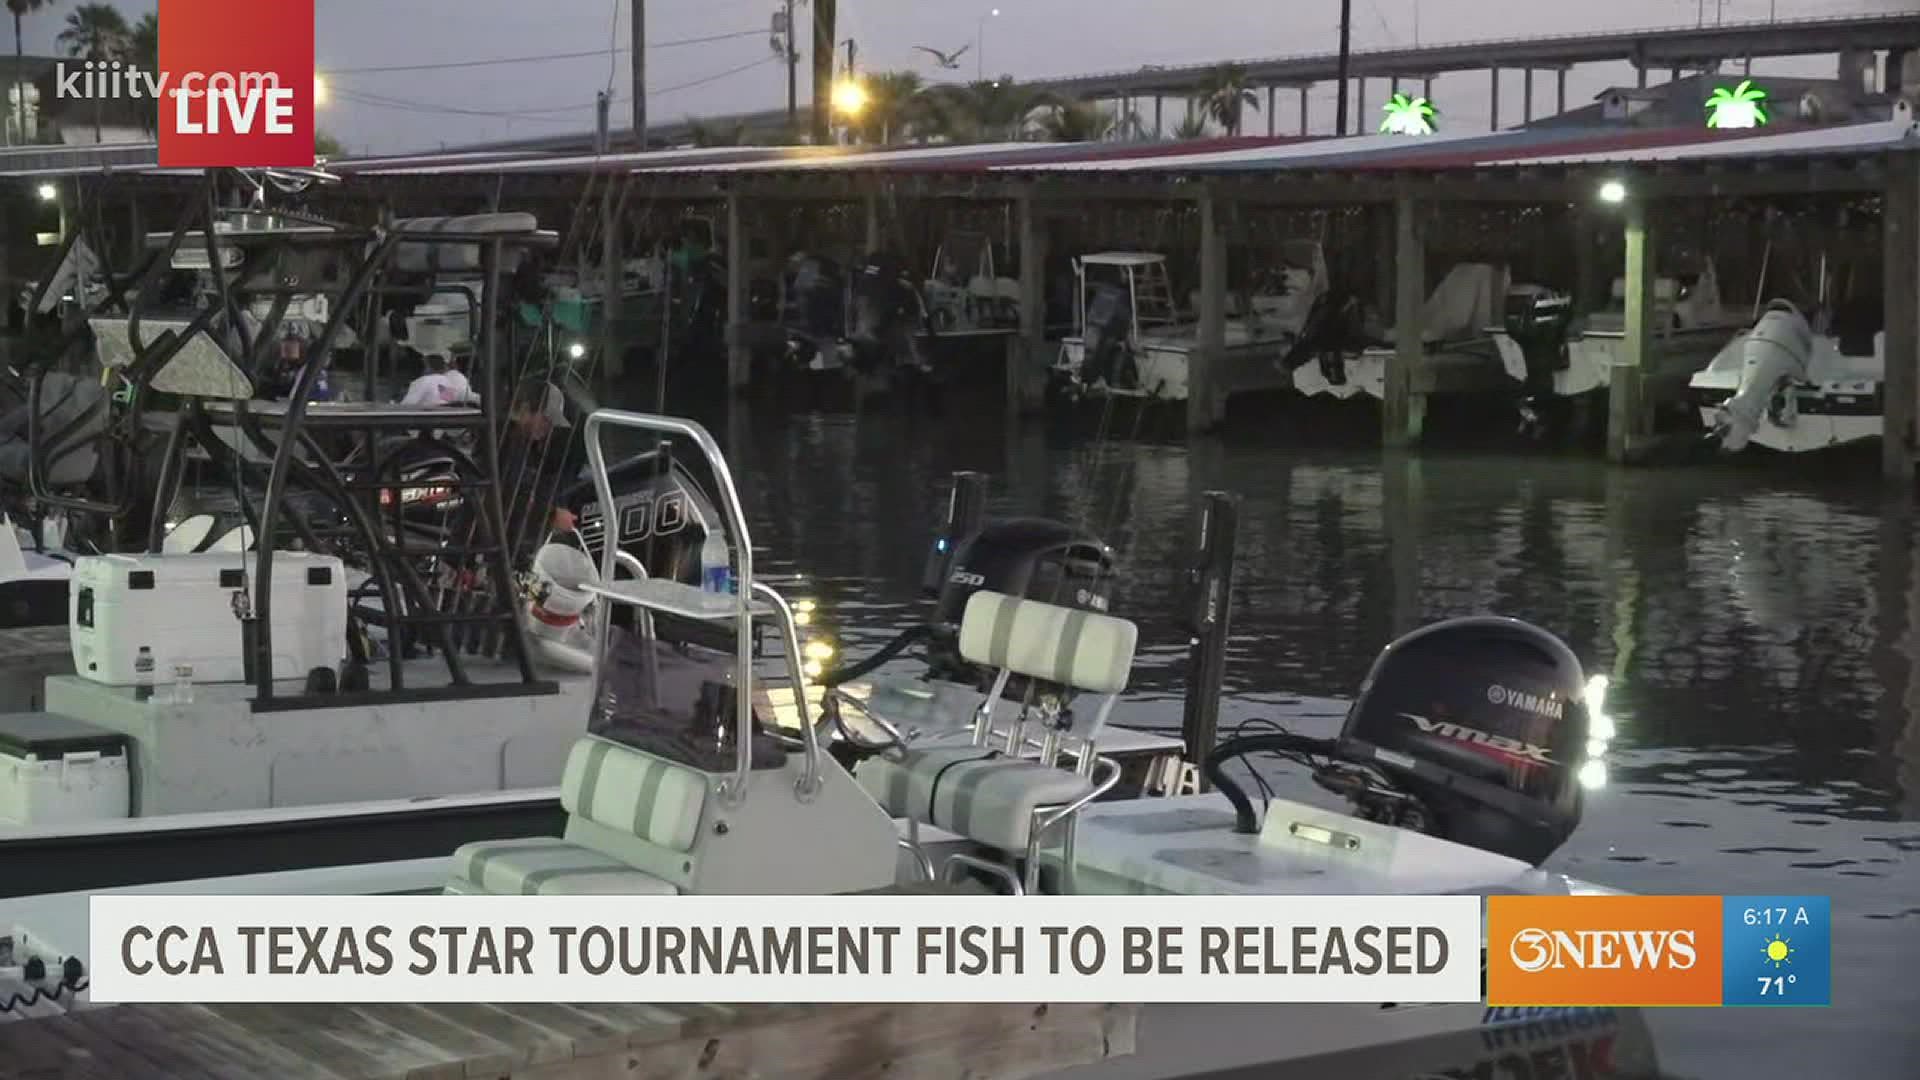 This years’ CCA Texas STAR Tournament kicks off May 28 at 6 a.m. This year STAR has doubled the number of tagged redfish from 60 to 120.